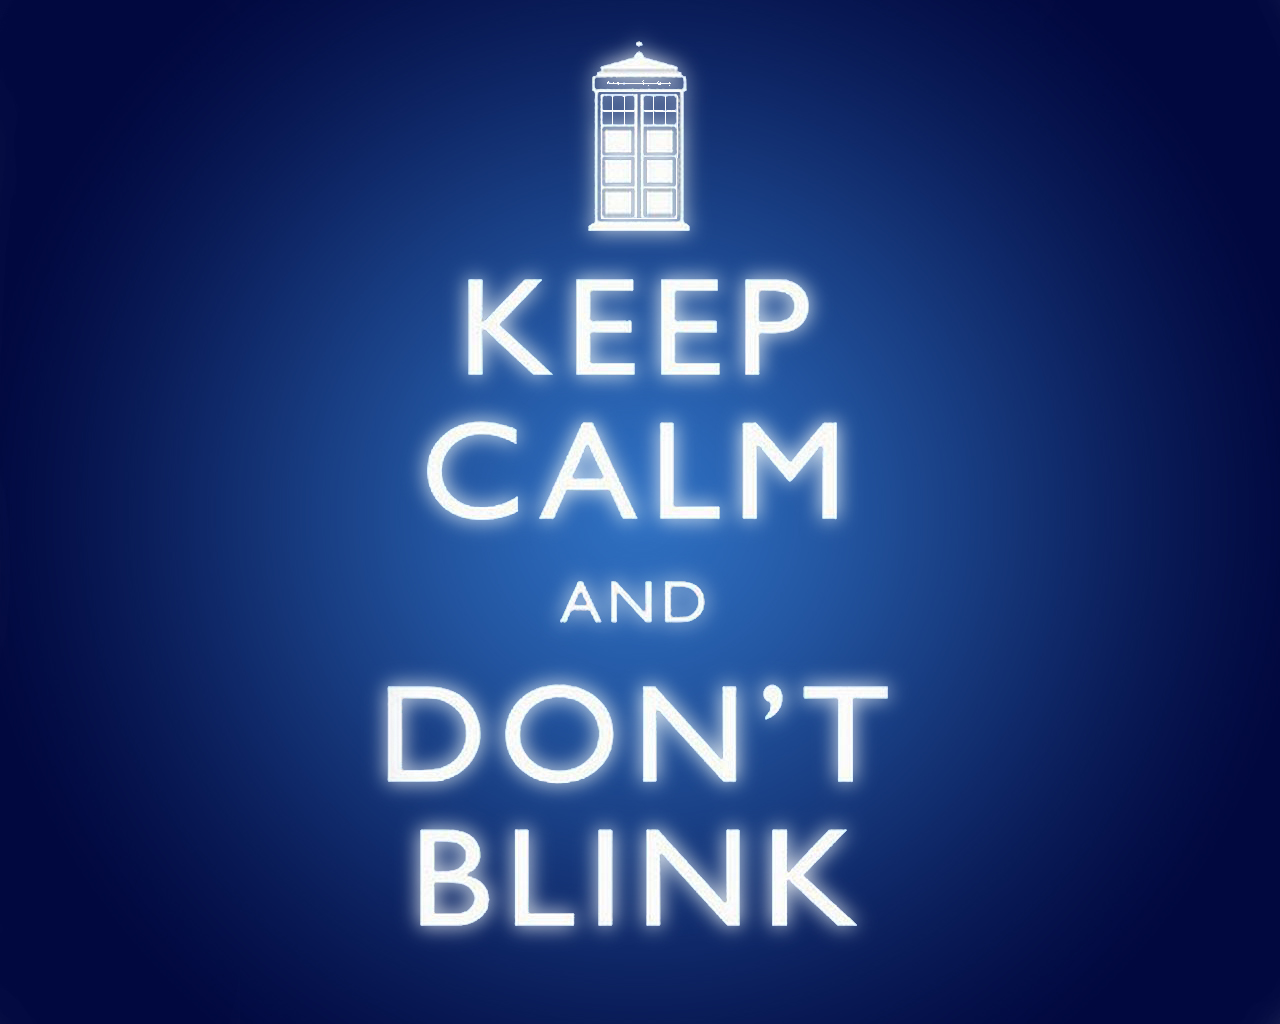 Doctor Who Phone Wallpaper Samsung Galaxy S4 Active Smartphone